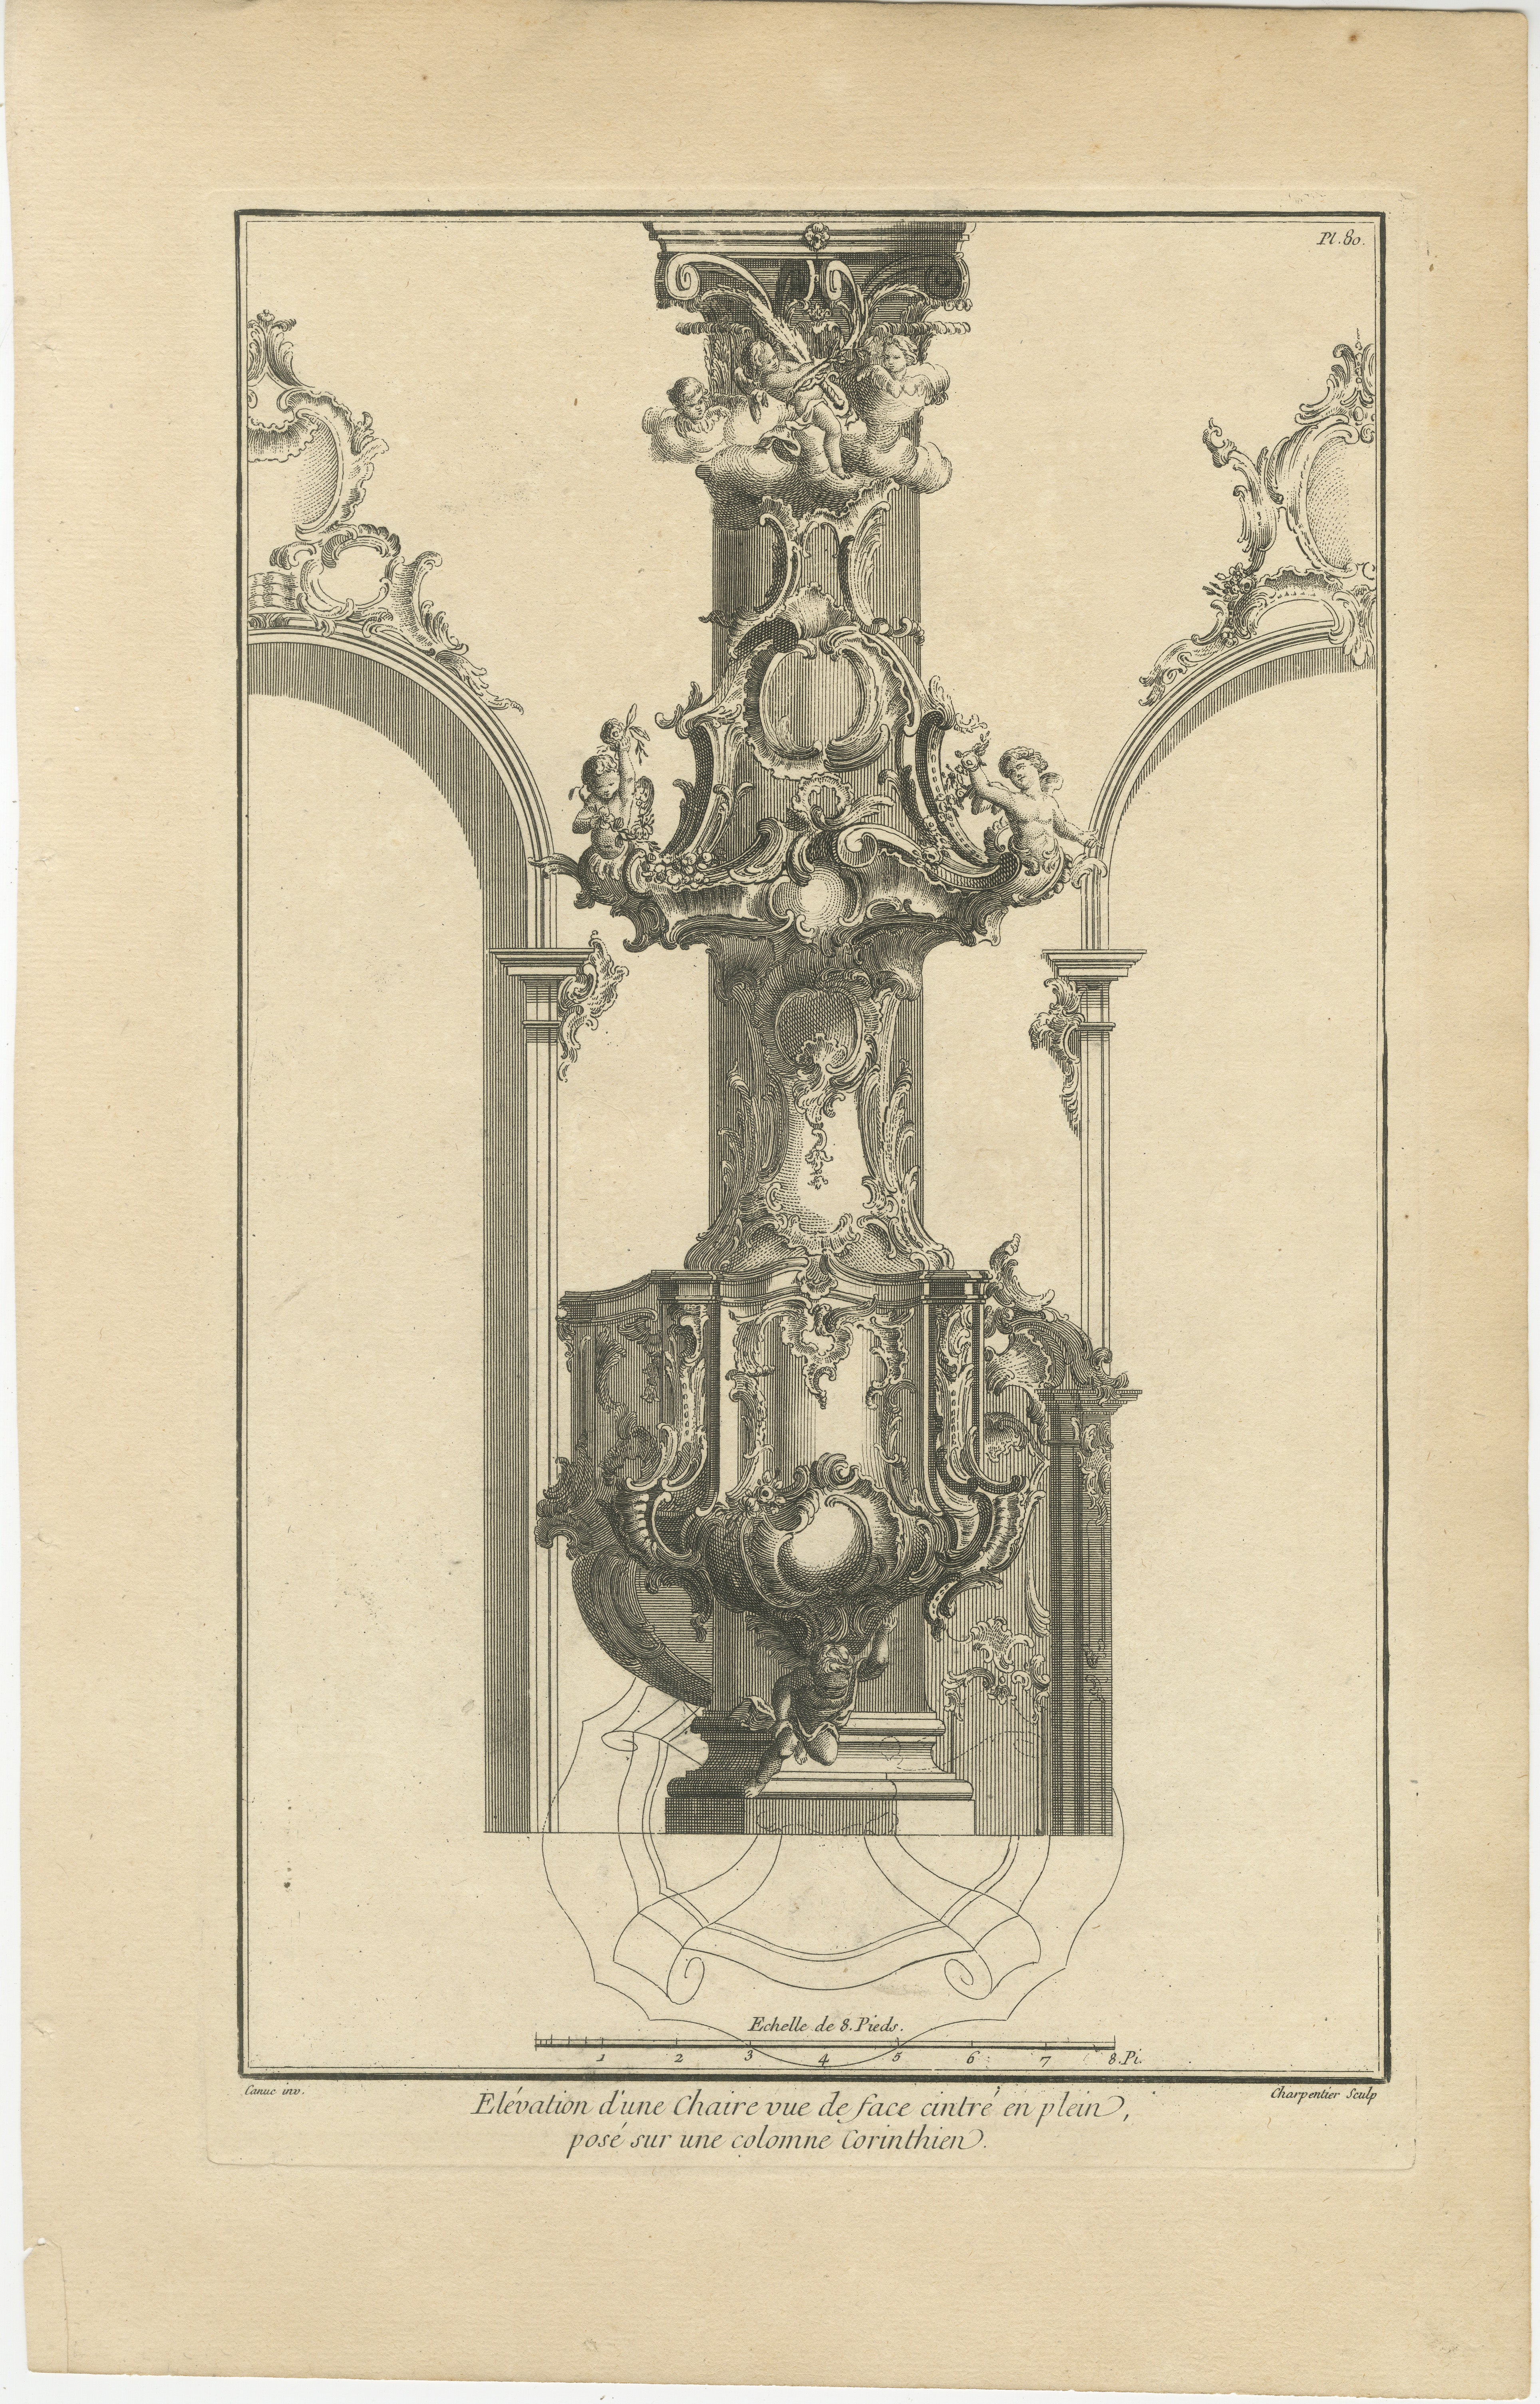 This is an original antique architectural design for a rococo pulpit dating approximately between 1740 and 1760. 

The artist responsible for this design is Franz Xaver Habermann, and it was published by Johann Georg Hertel I in Augsburg. The design